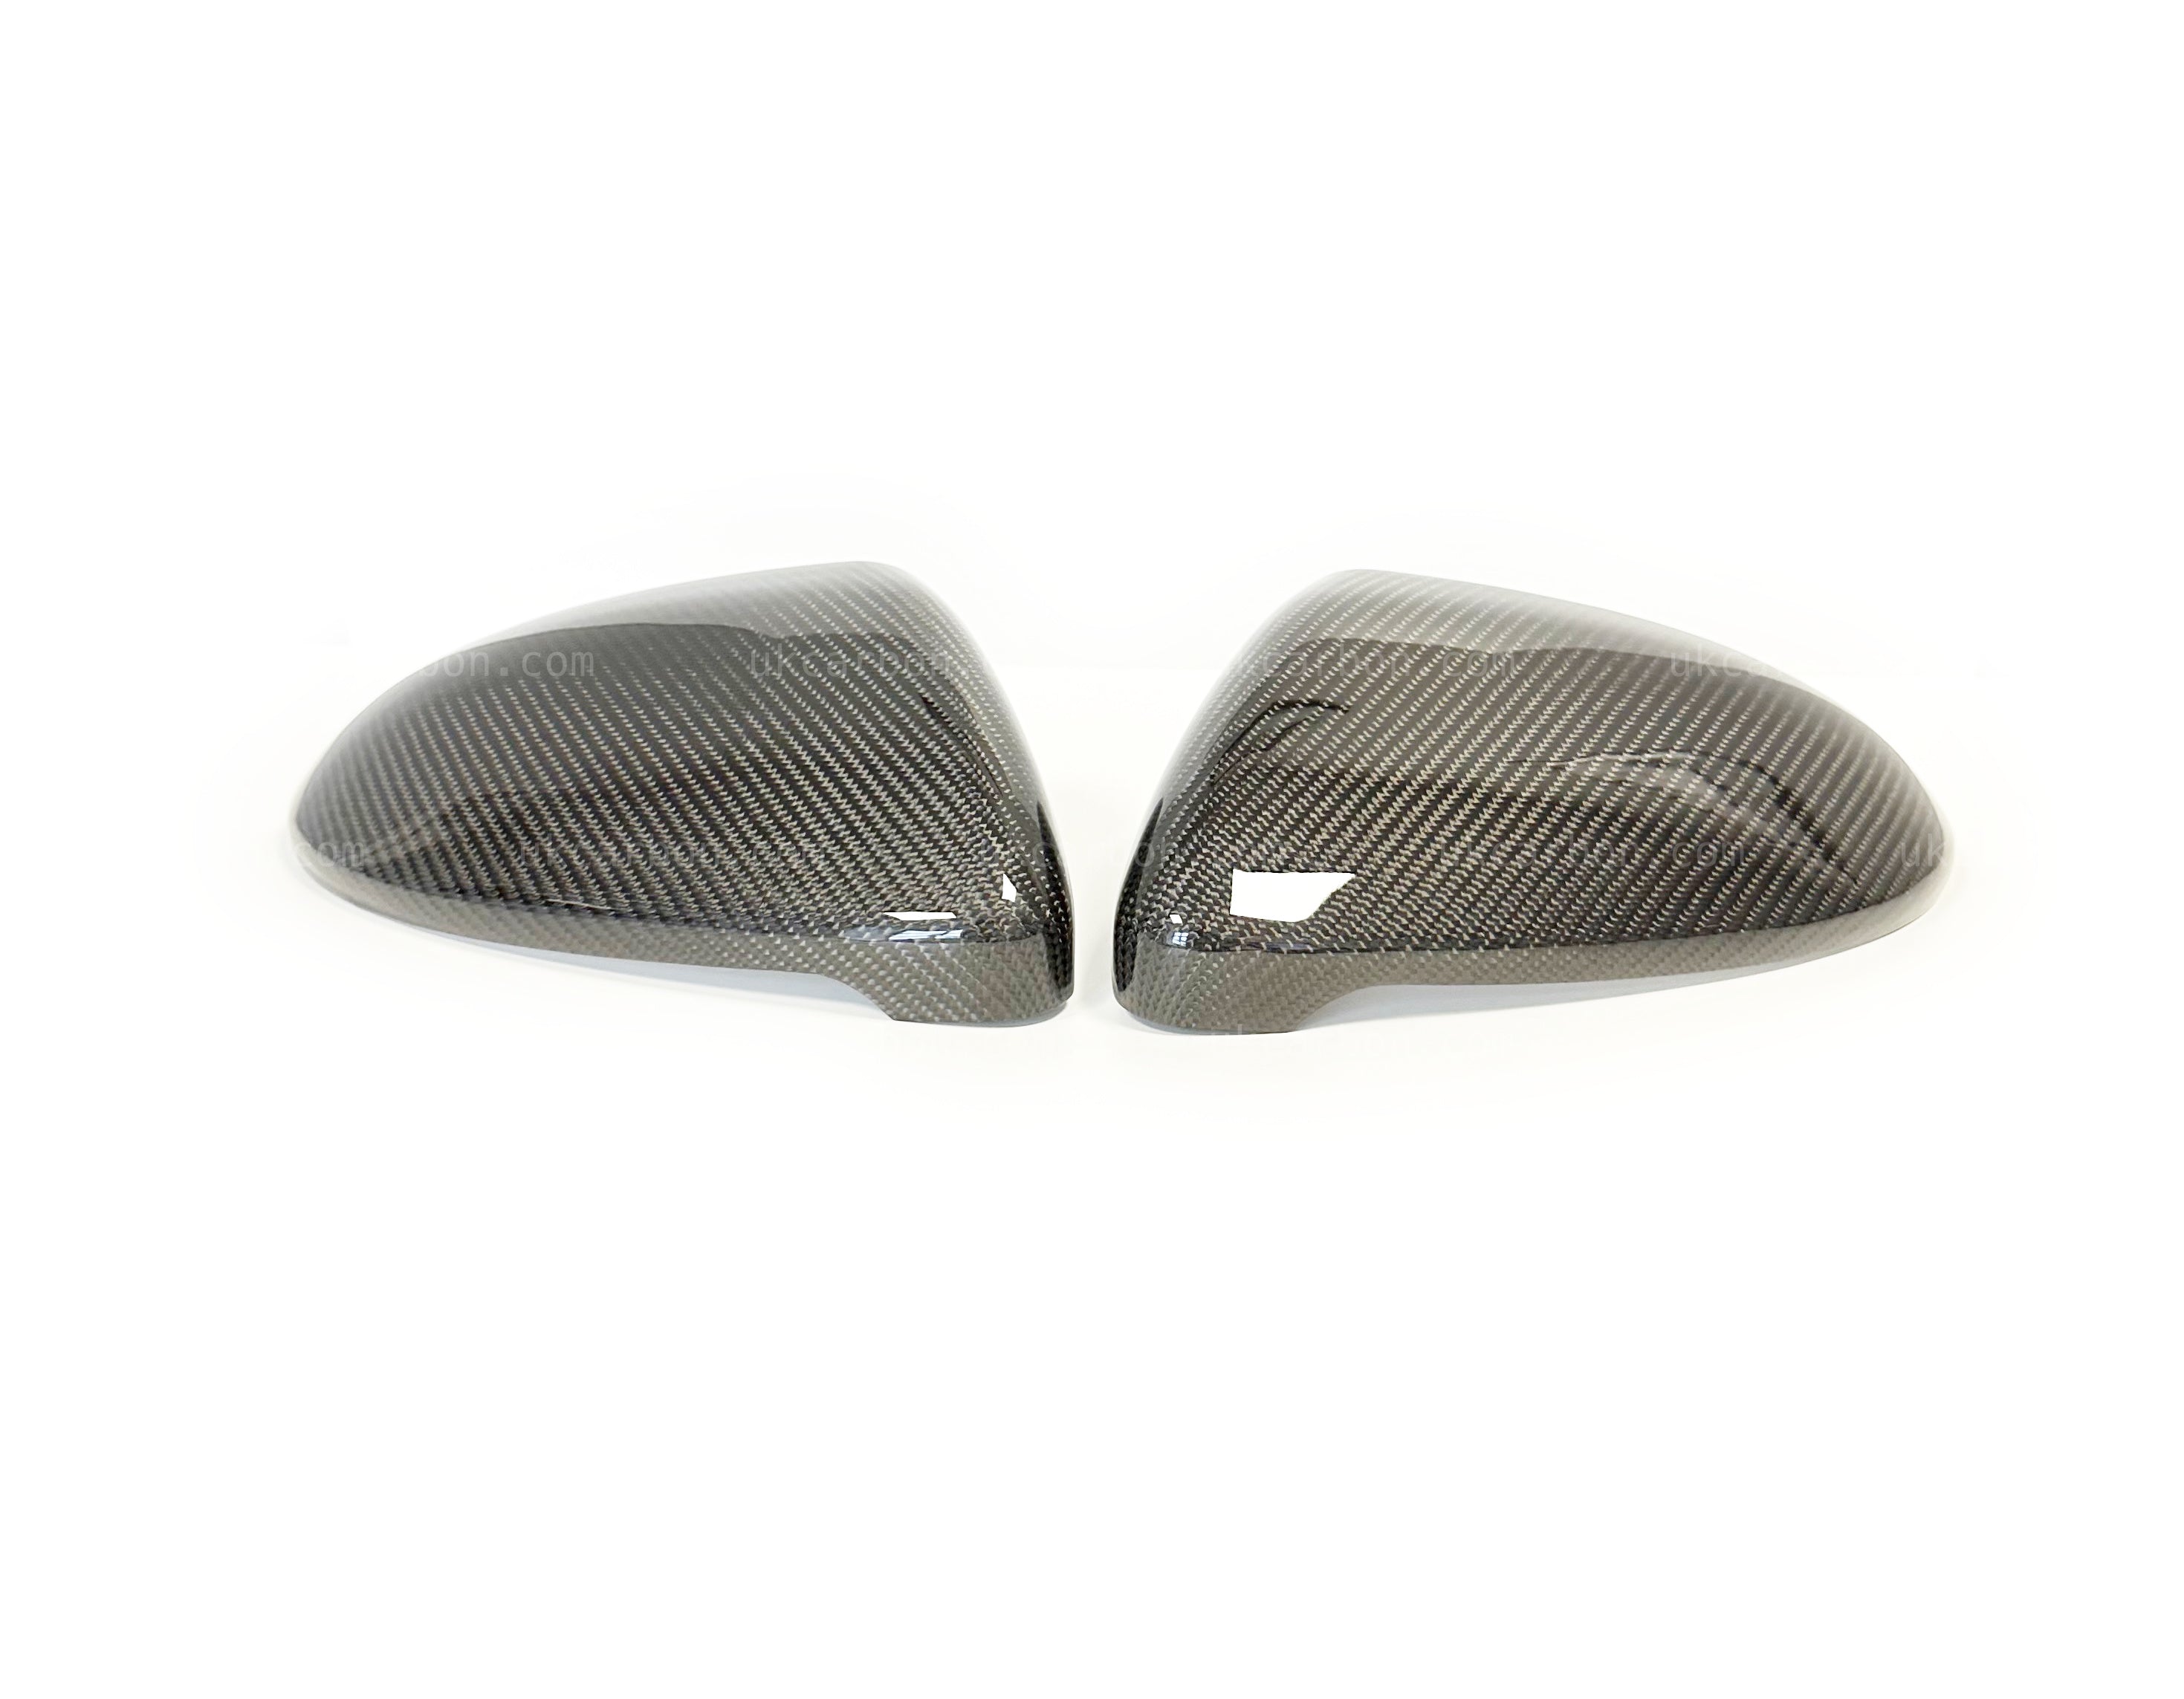 UKCARBON Carbon Fibre Wing Mirror Cover Replacements For VW Golf MK7 GTD TDI